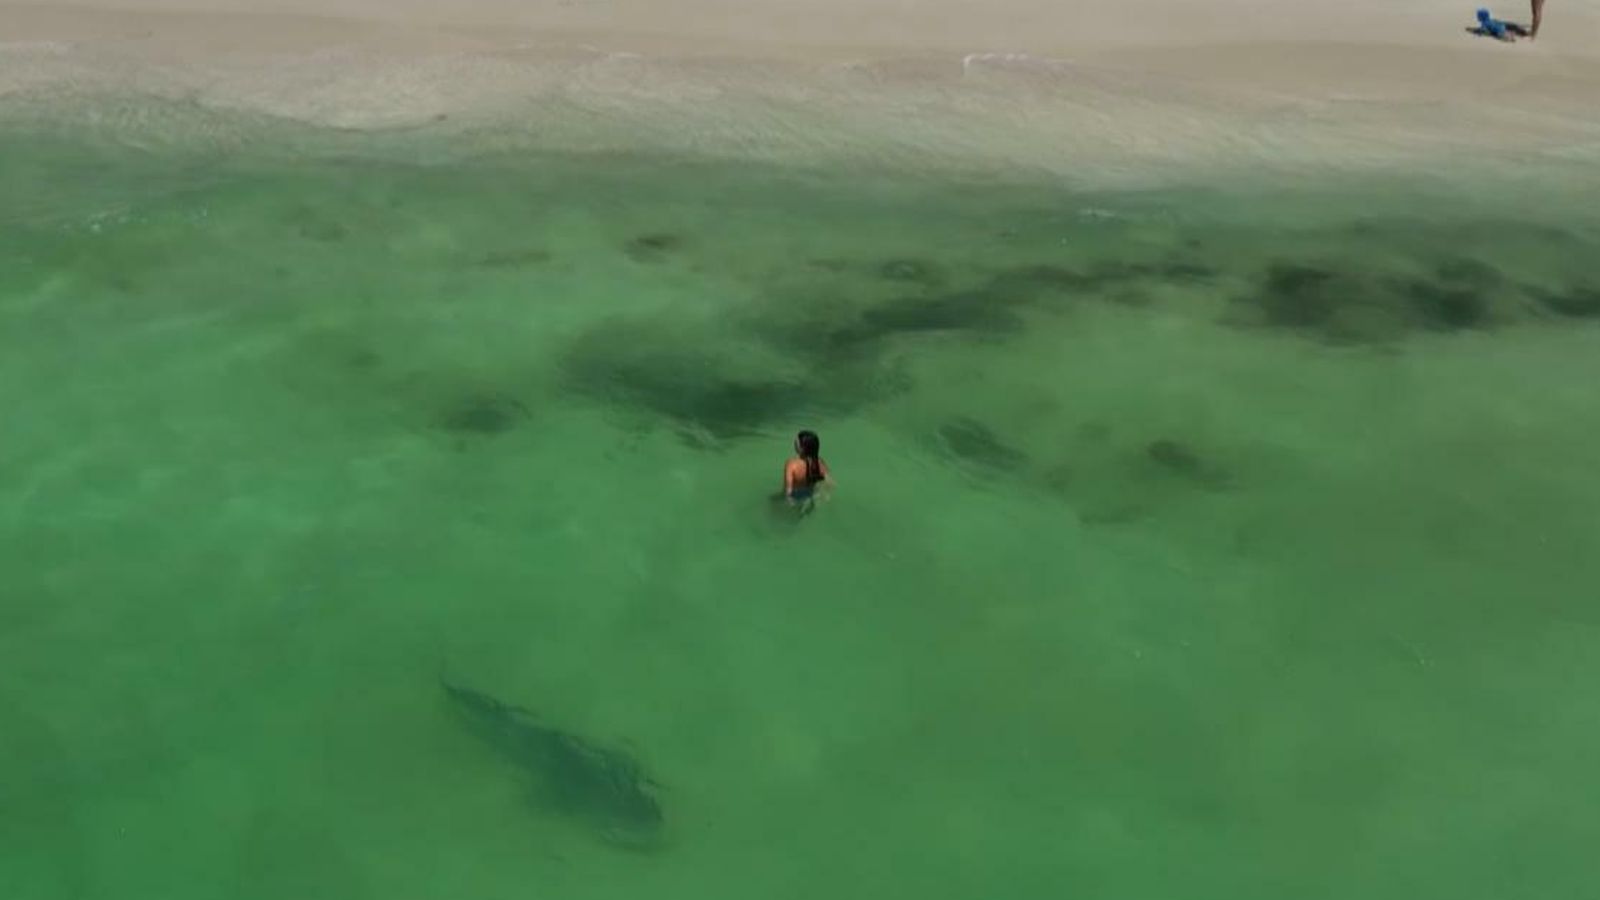 Australia: Tiger shark spotted just metres from oblivious swimmers